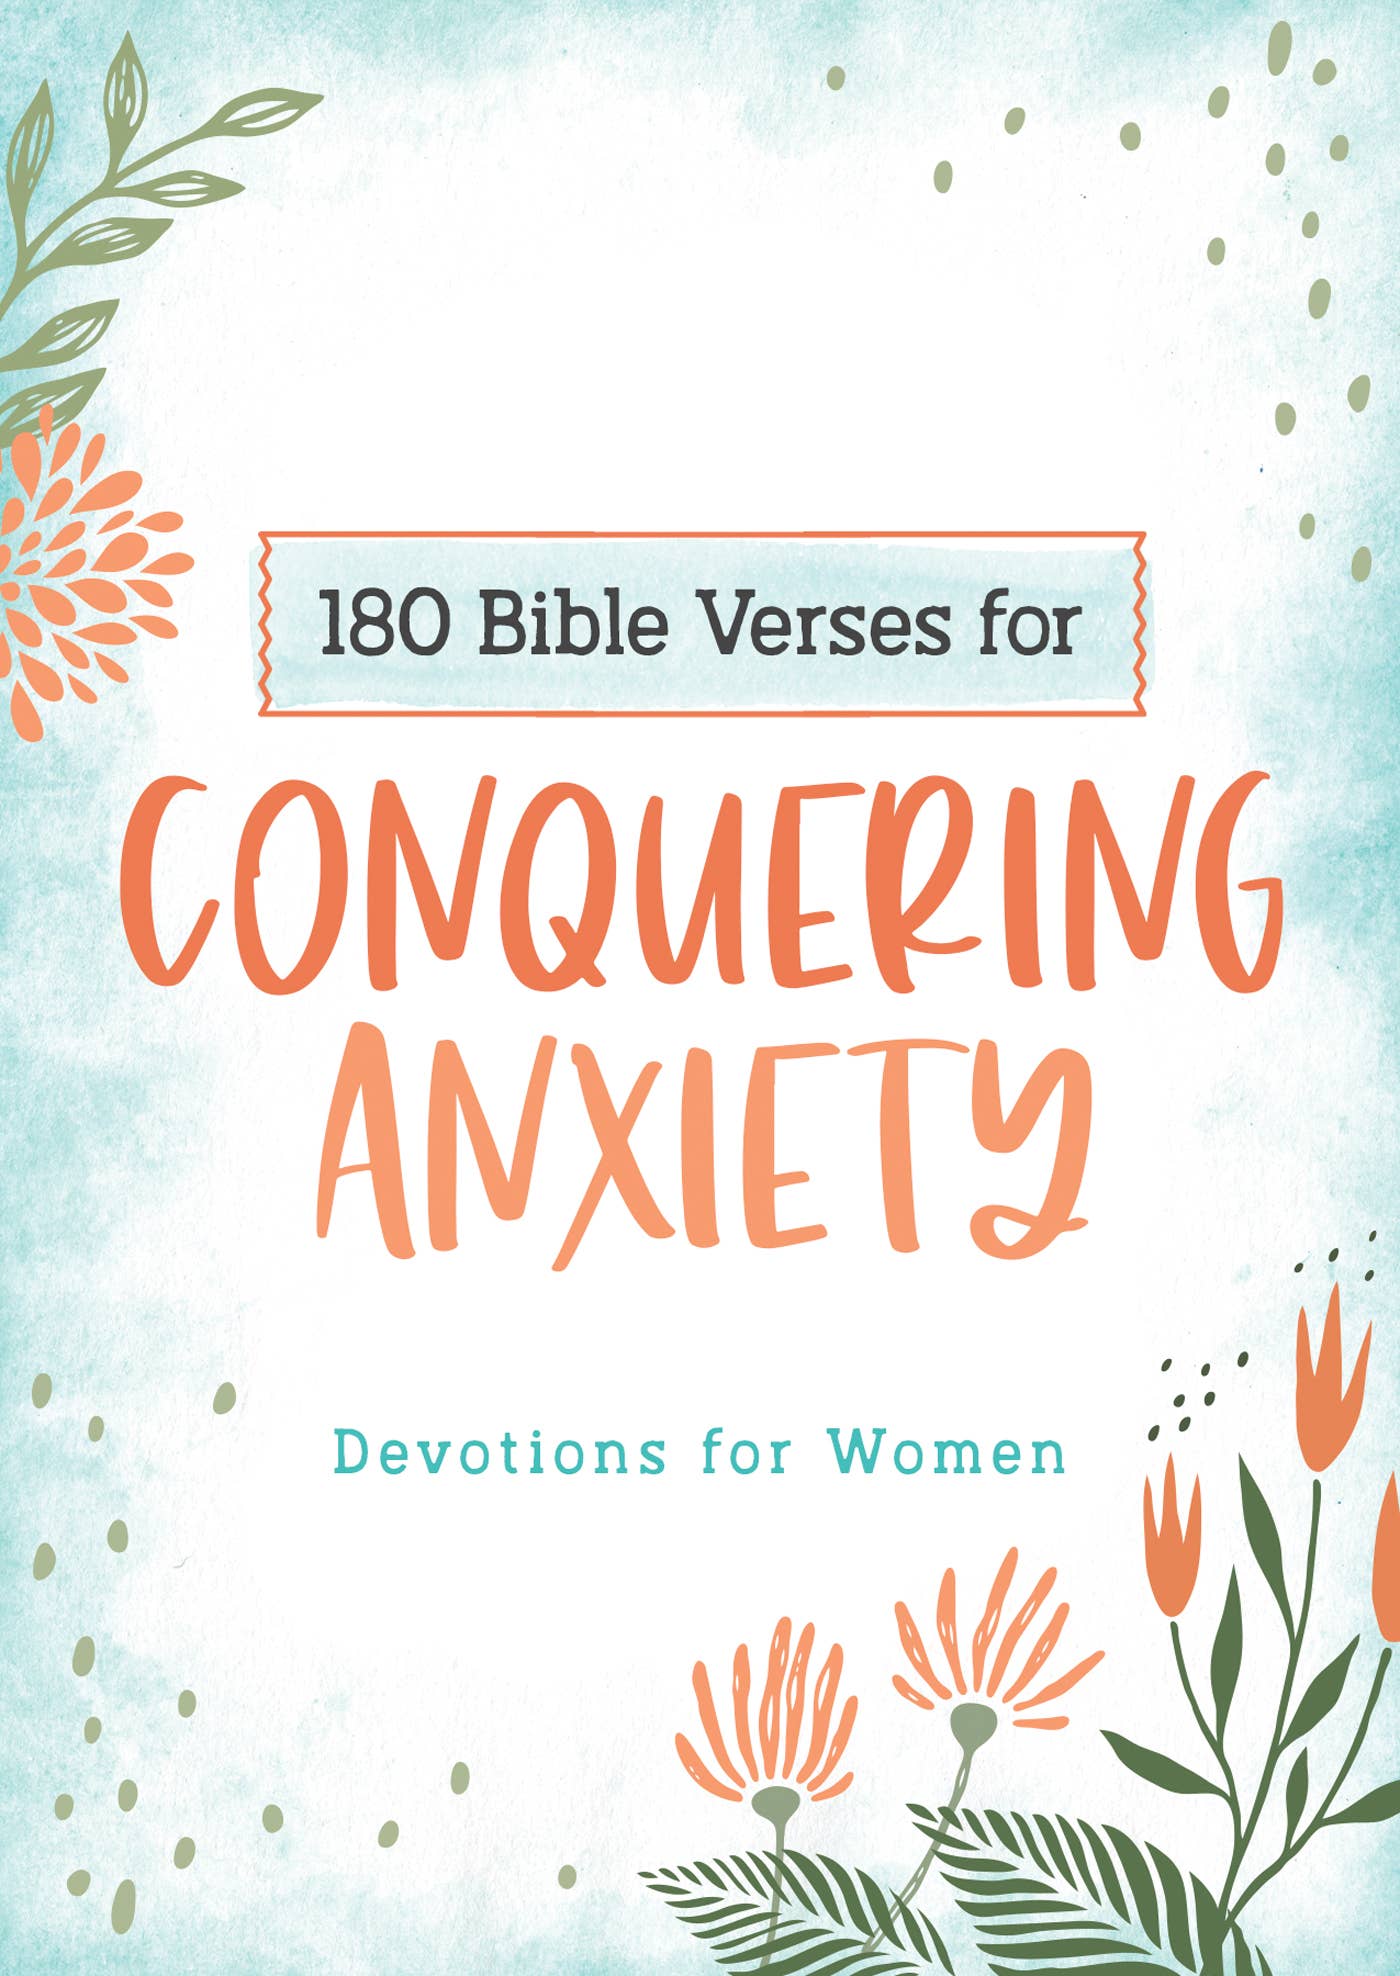 180 Bible Verses for Conquering Anxiety Core Barbour Publishing, Inc.